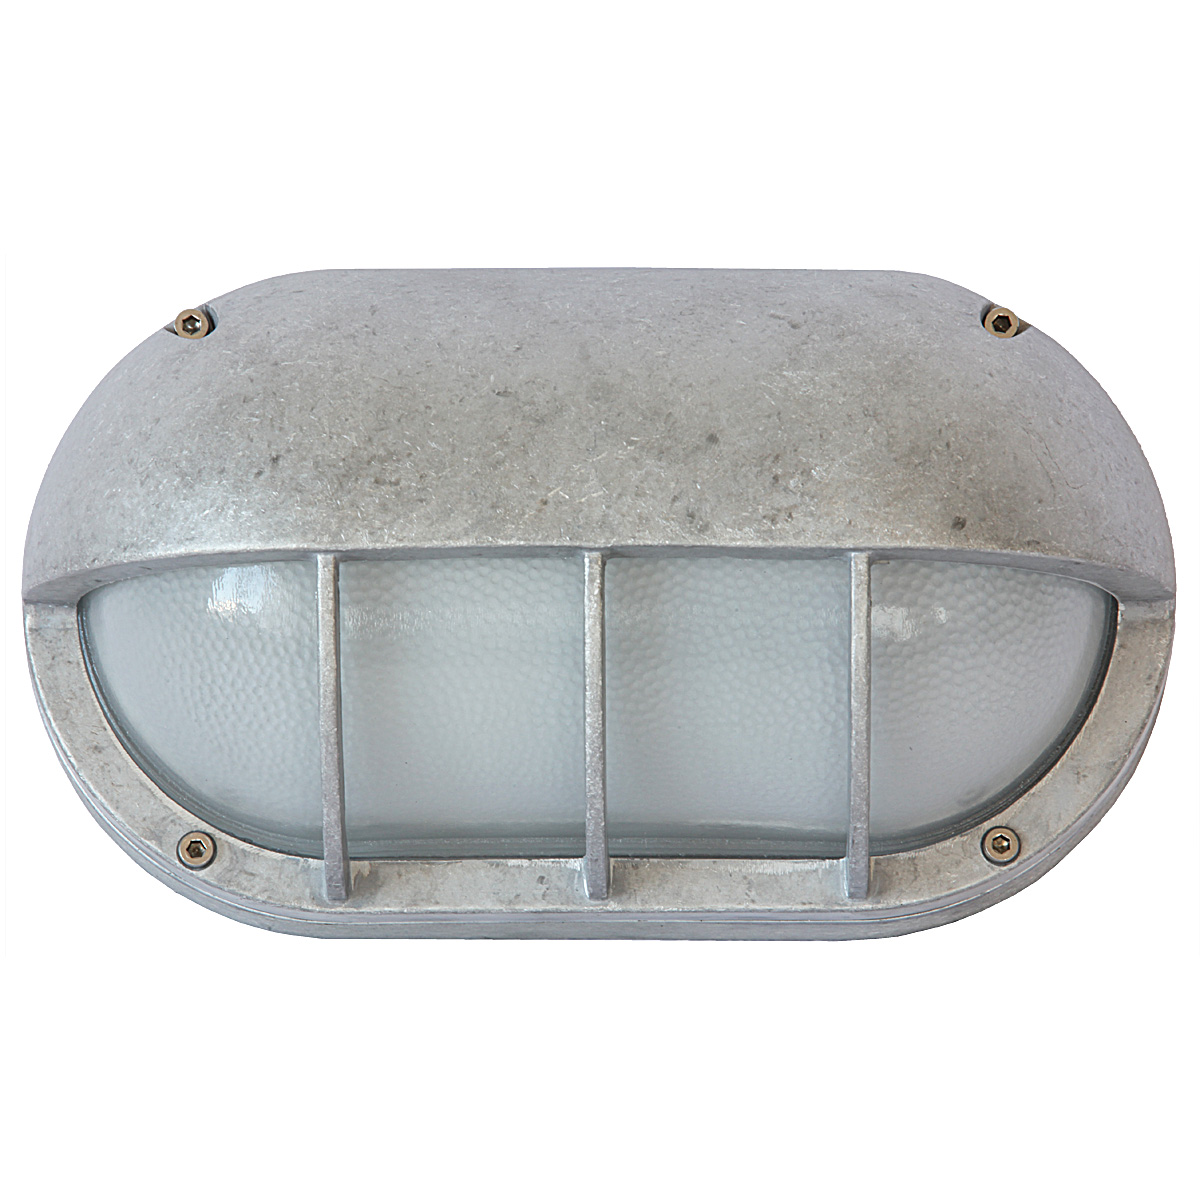 Oval Deck Light in Aluminium with Eyelid Shield 8125